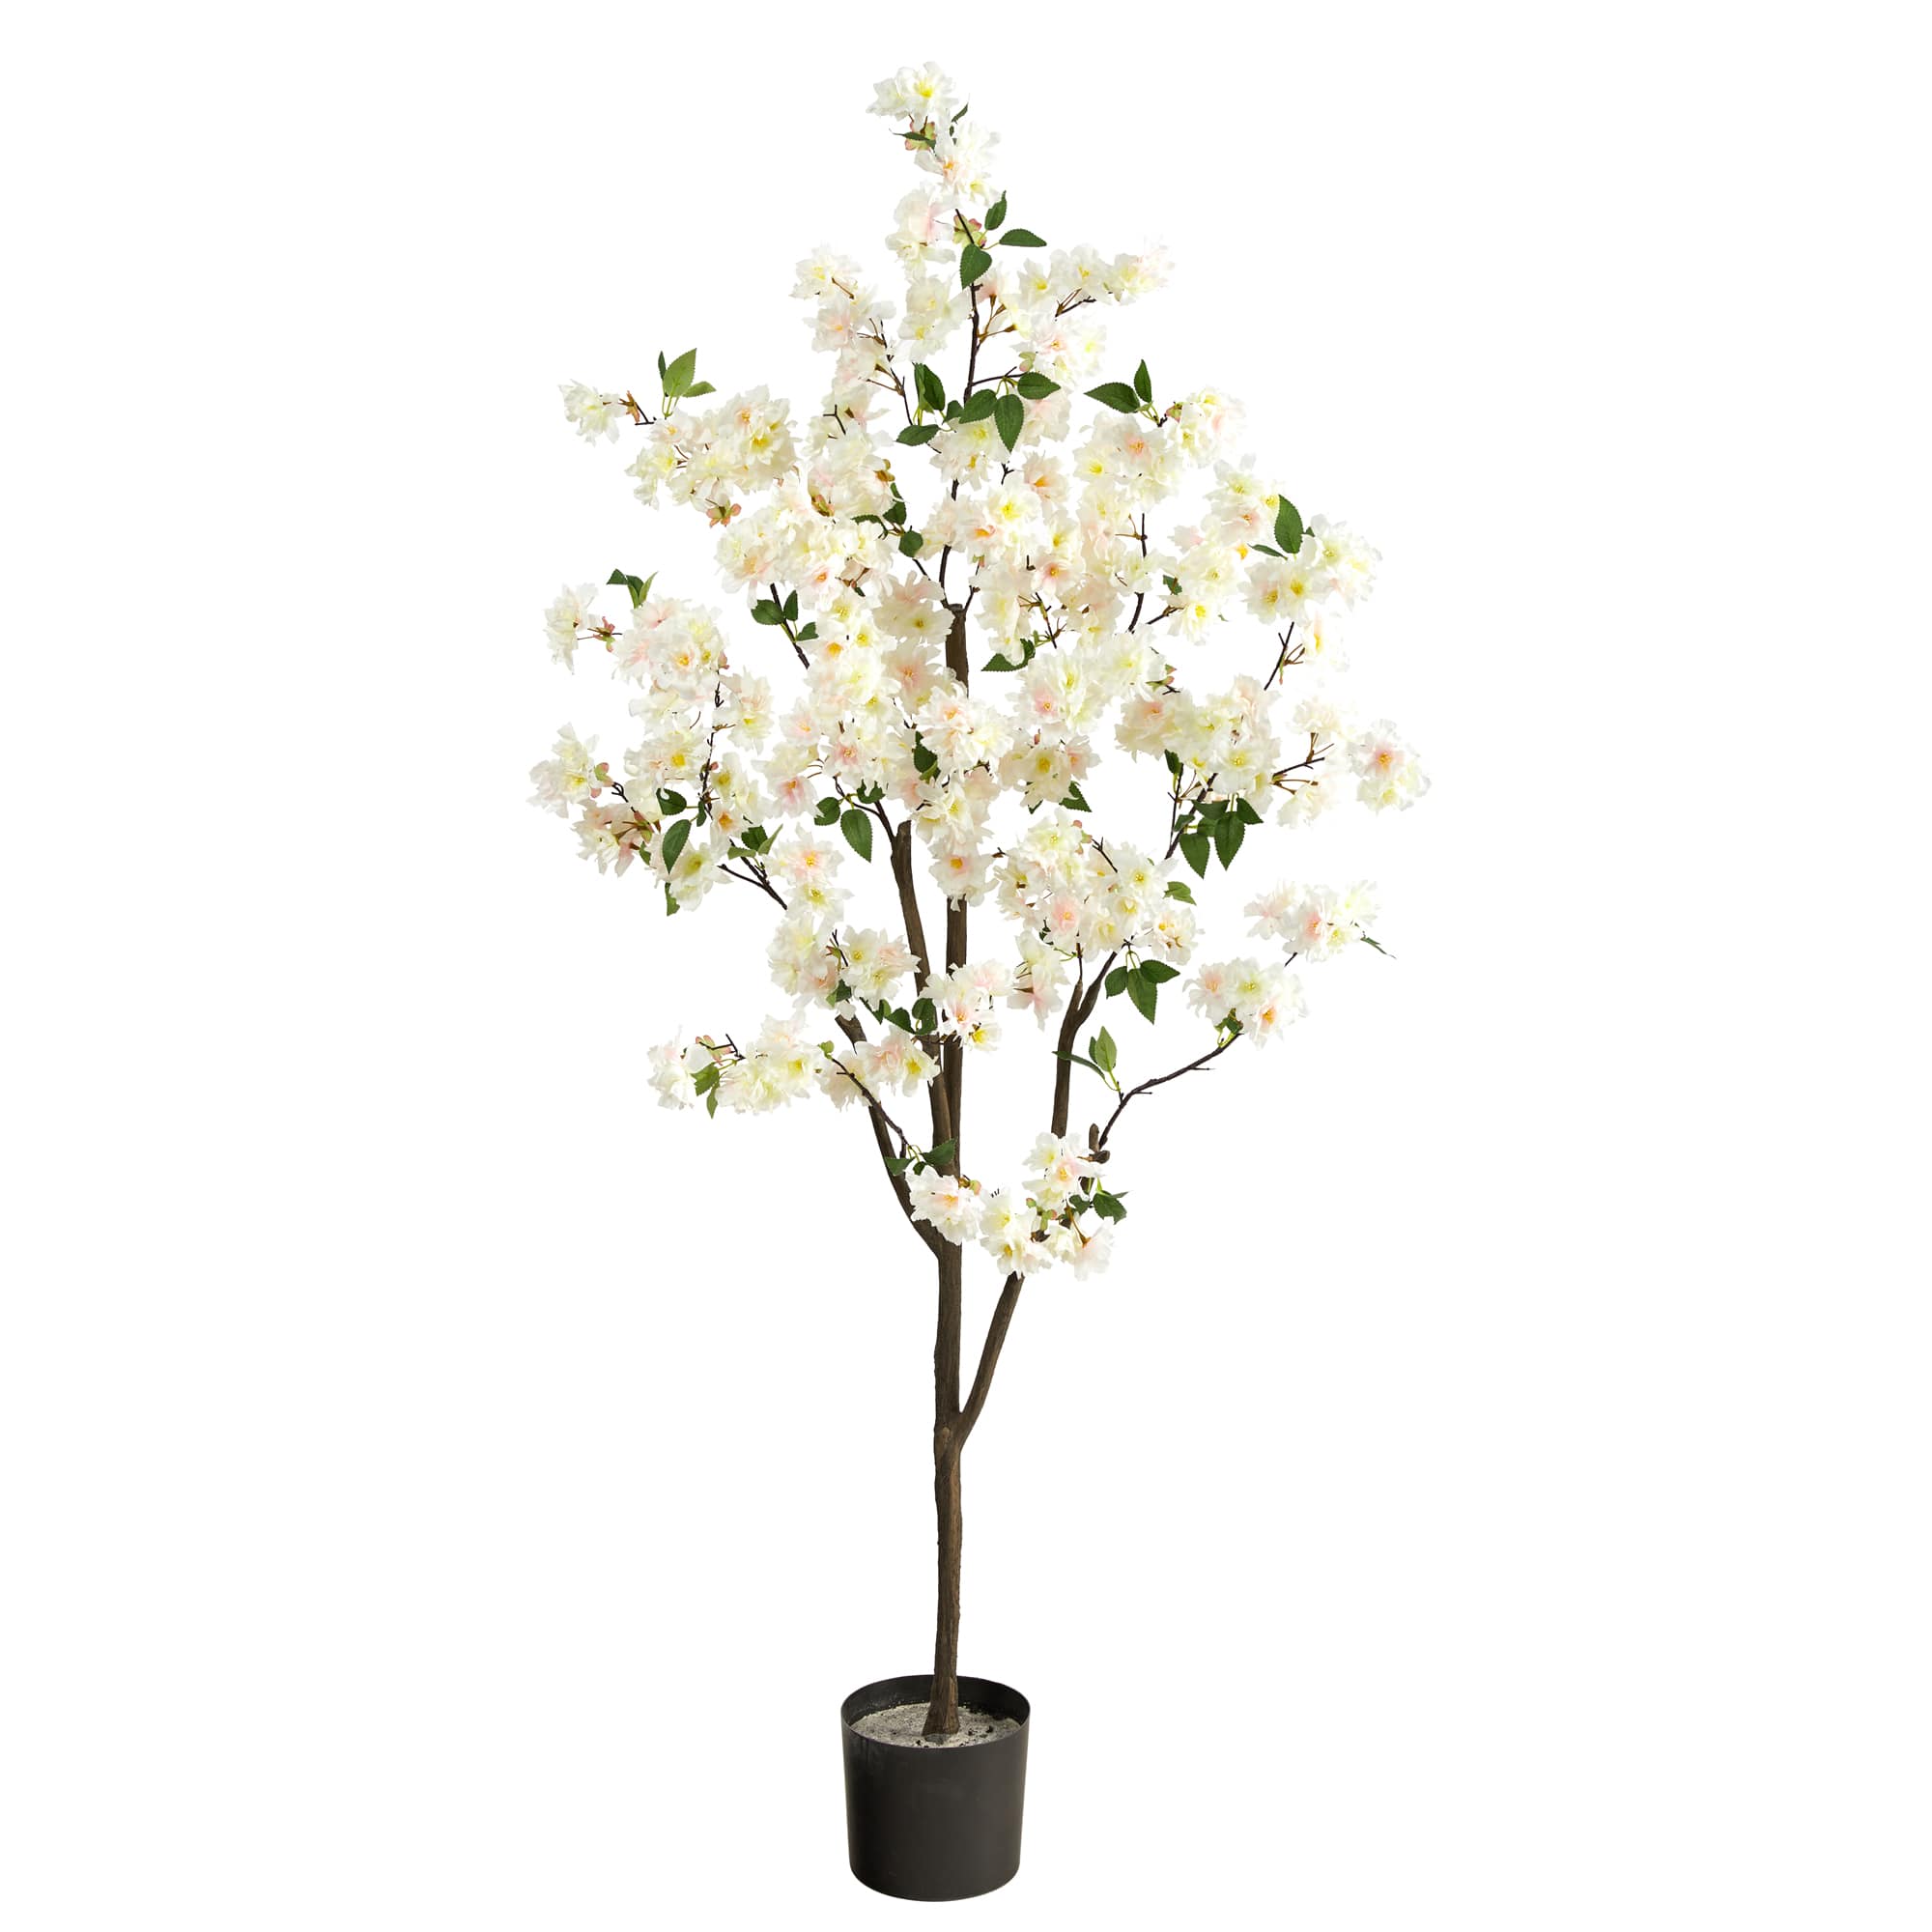 6ft. Potted White Cherry Blossom Tree | Michaels